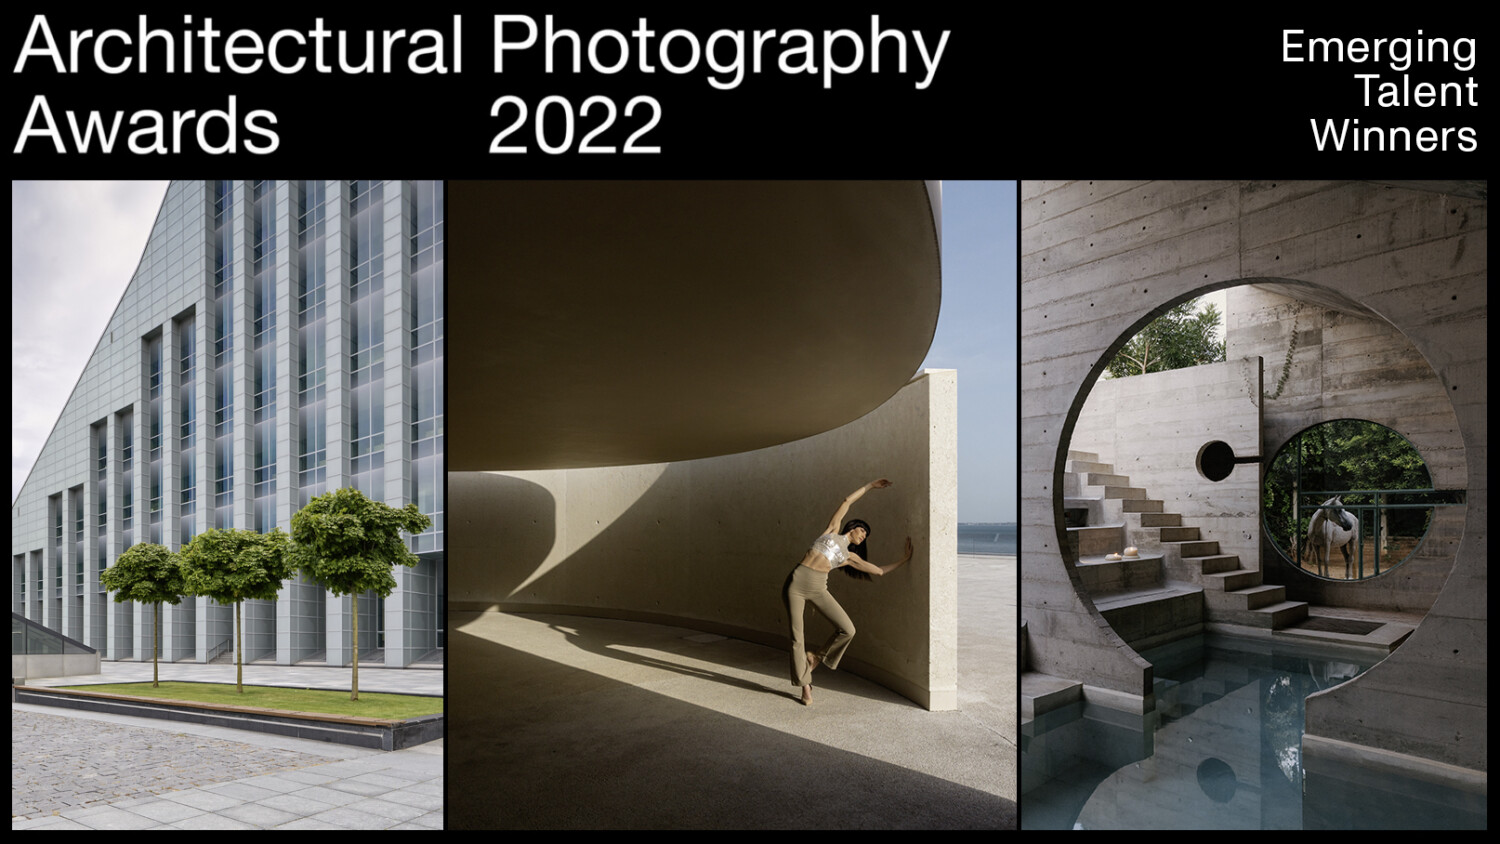 The 2022 Early Career and Emerging Talent Architectural Photography Award Winners